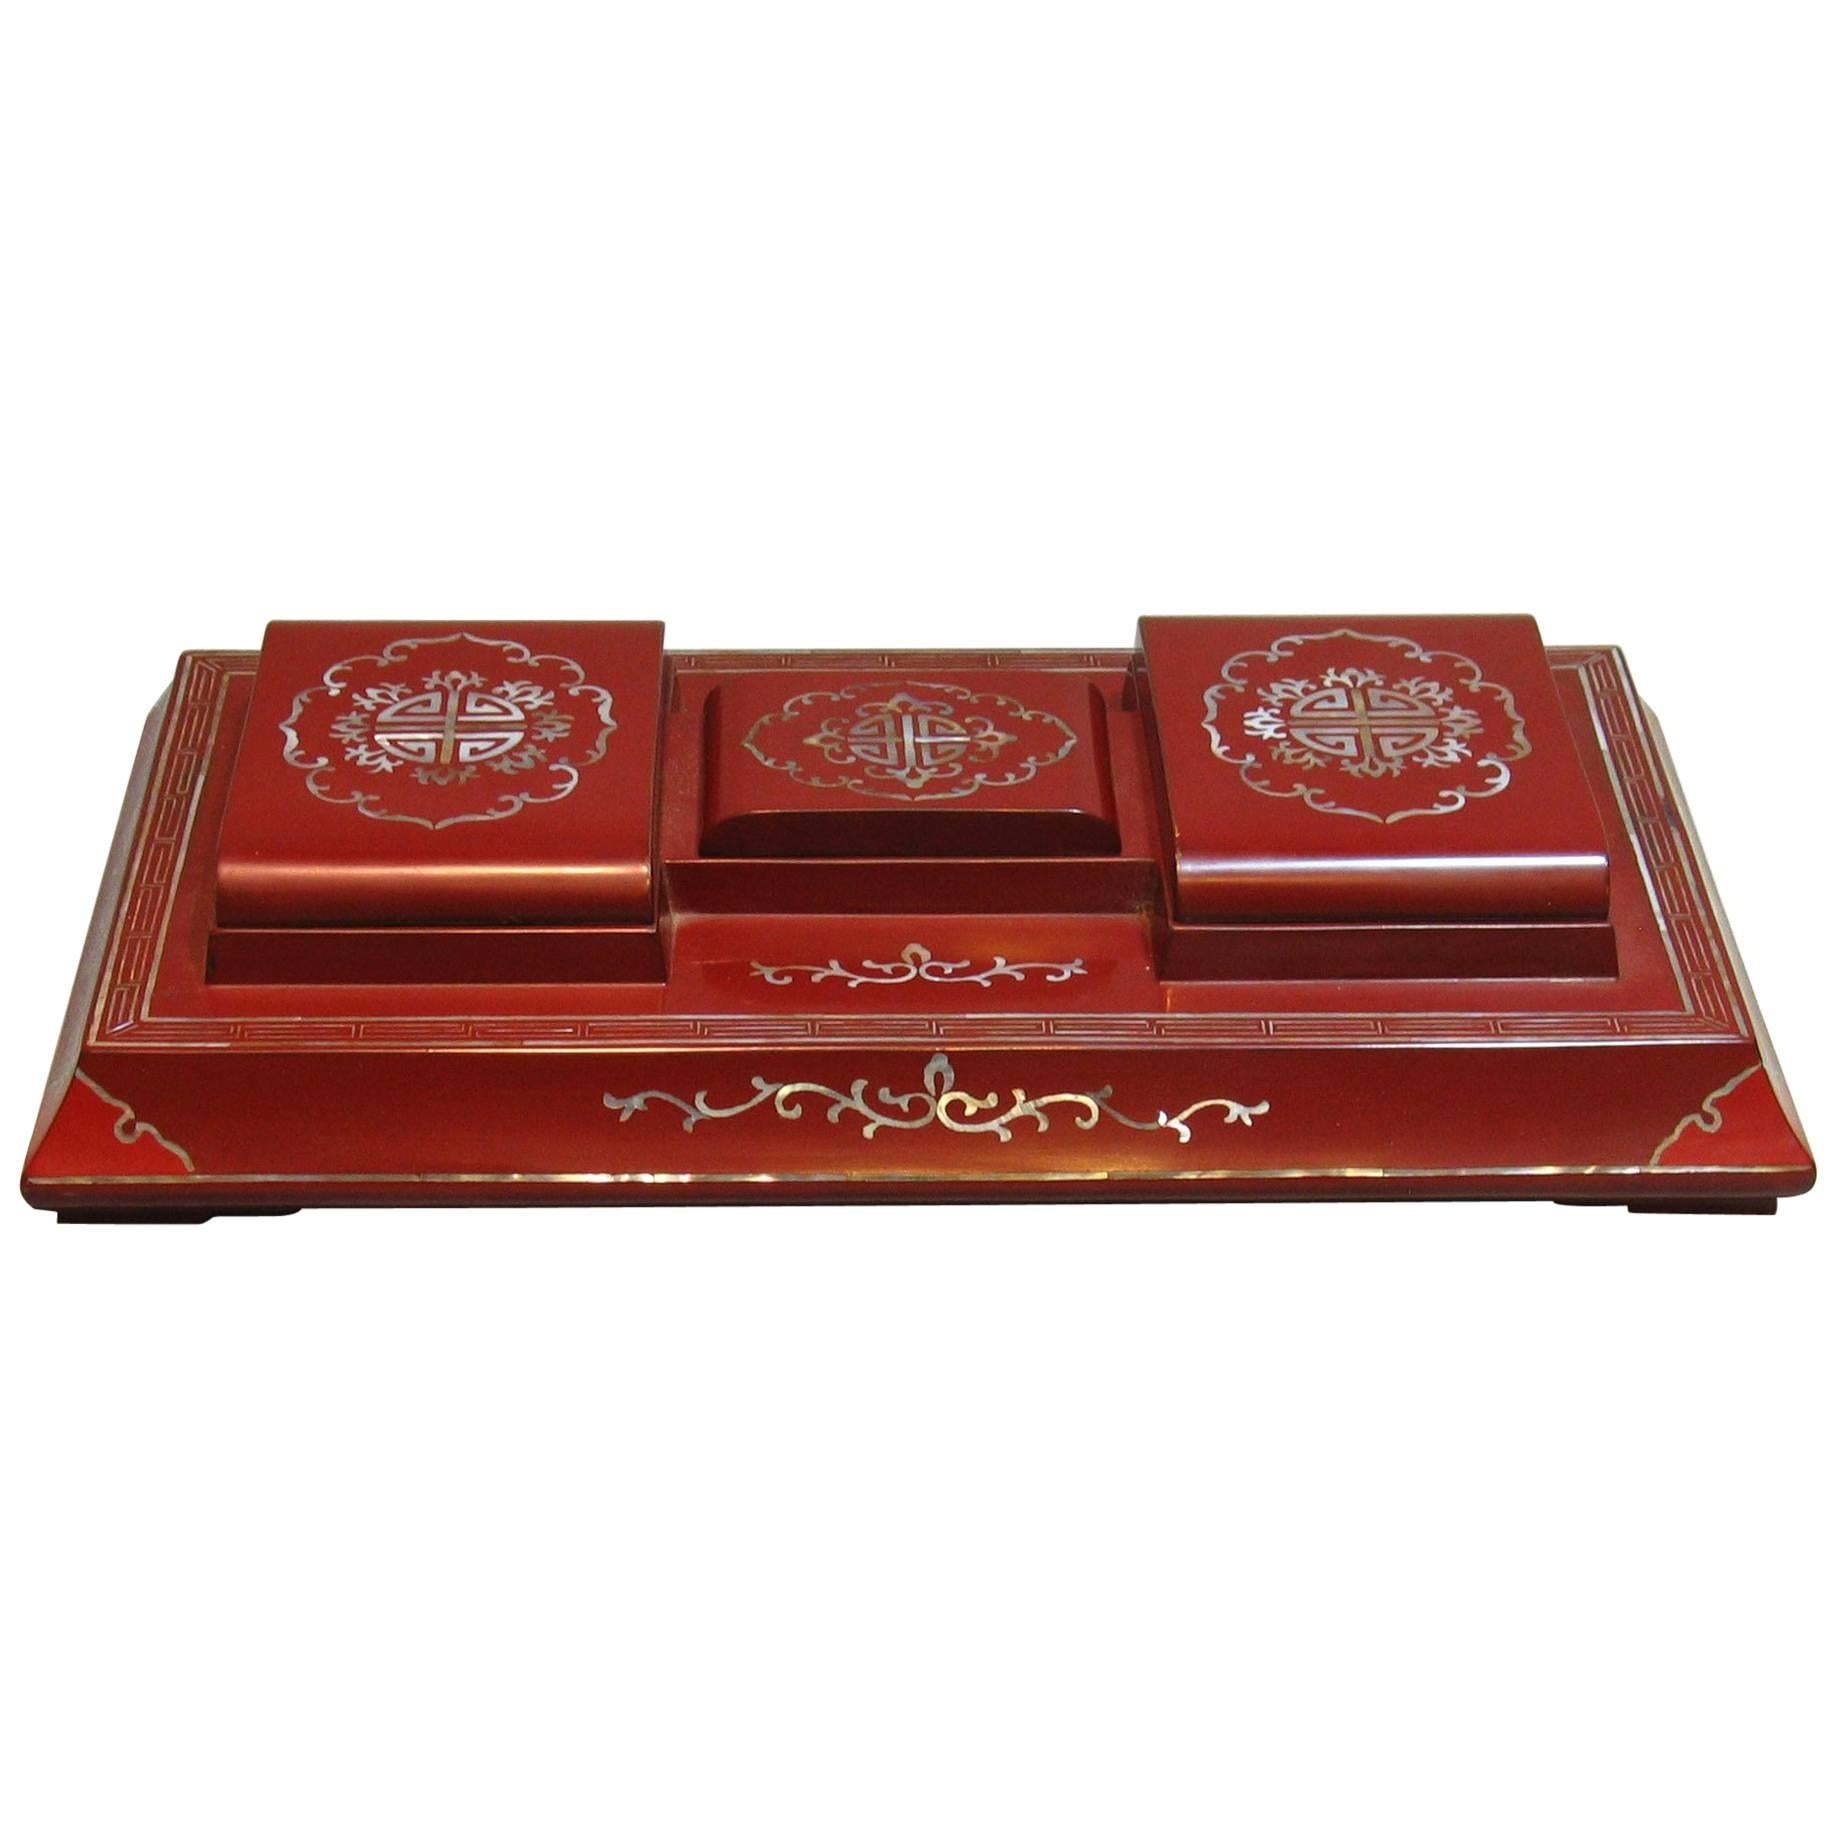 Rare Antique Chinese Red Lacquer Desk Box Early 20th Century For Sale